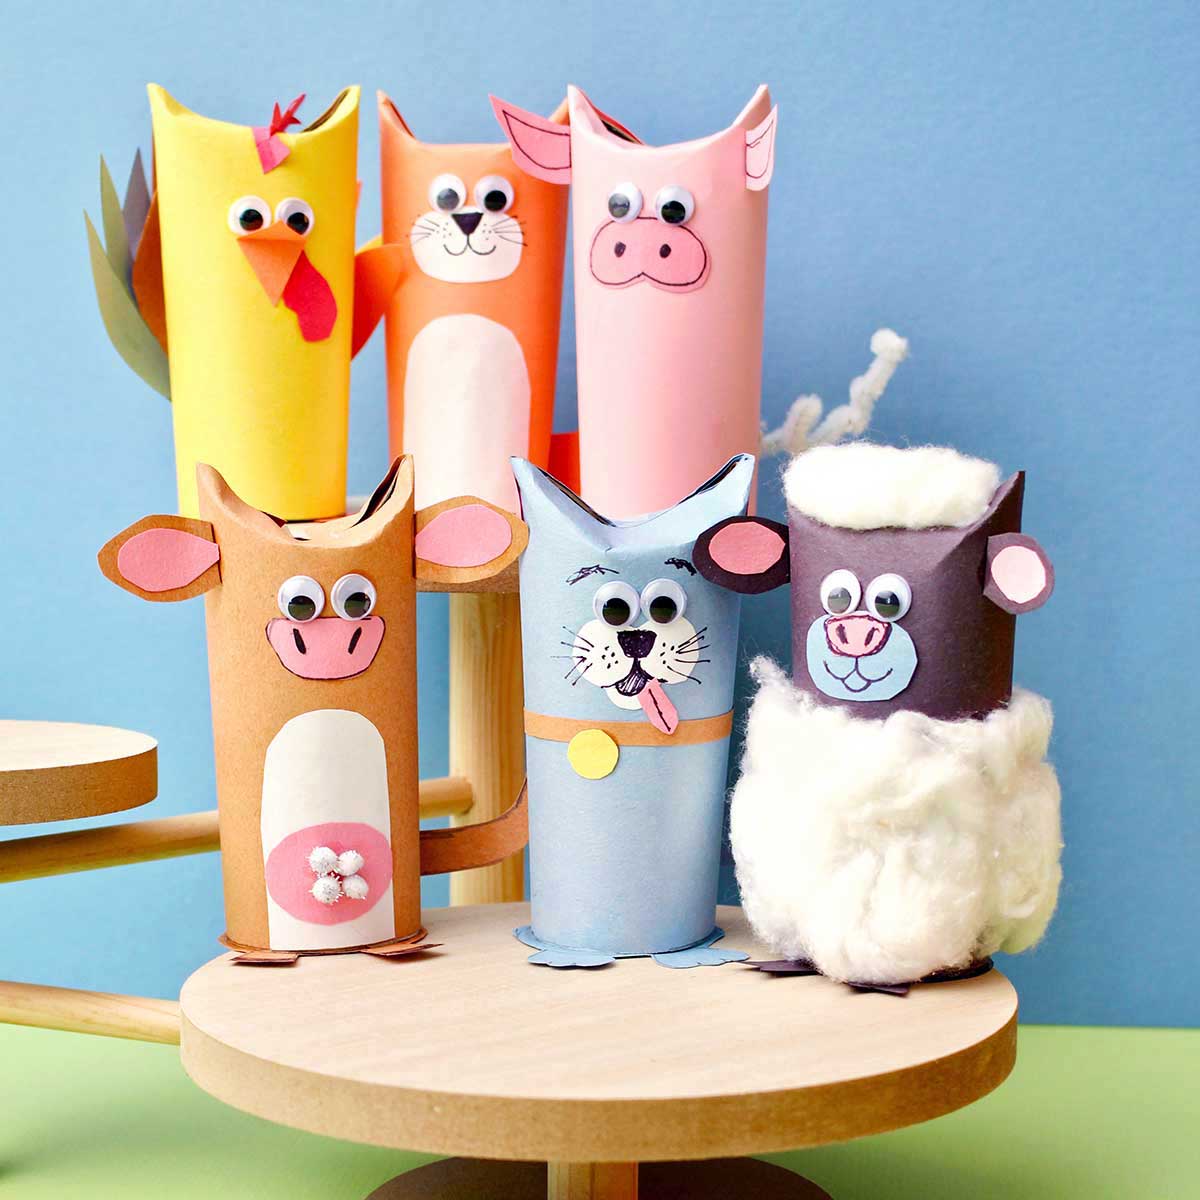 Six cute toilet paper roll animals on wooden stands in front of blue backdrop.